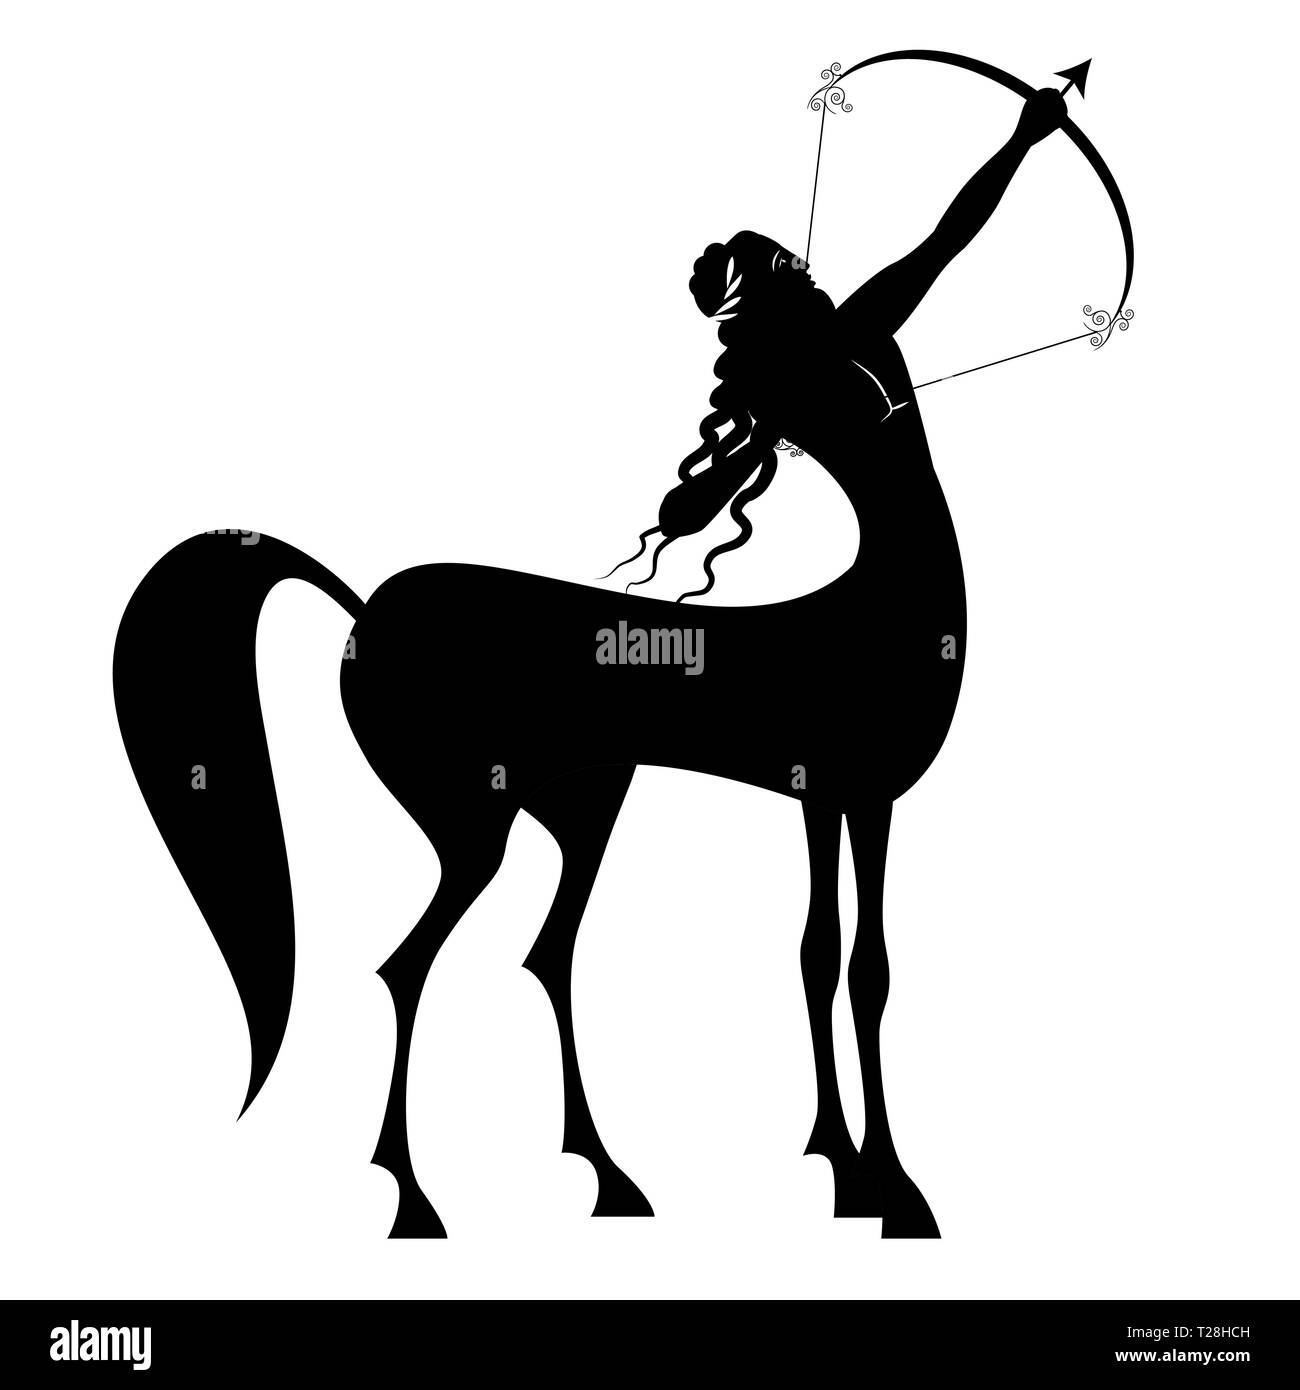 Zodiac in the style of Ancient Greece. Sagittarius. Black figure representing a centaur with long hair and laurel wreath, tensing a bow to shoot an ar Stock Vector